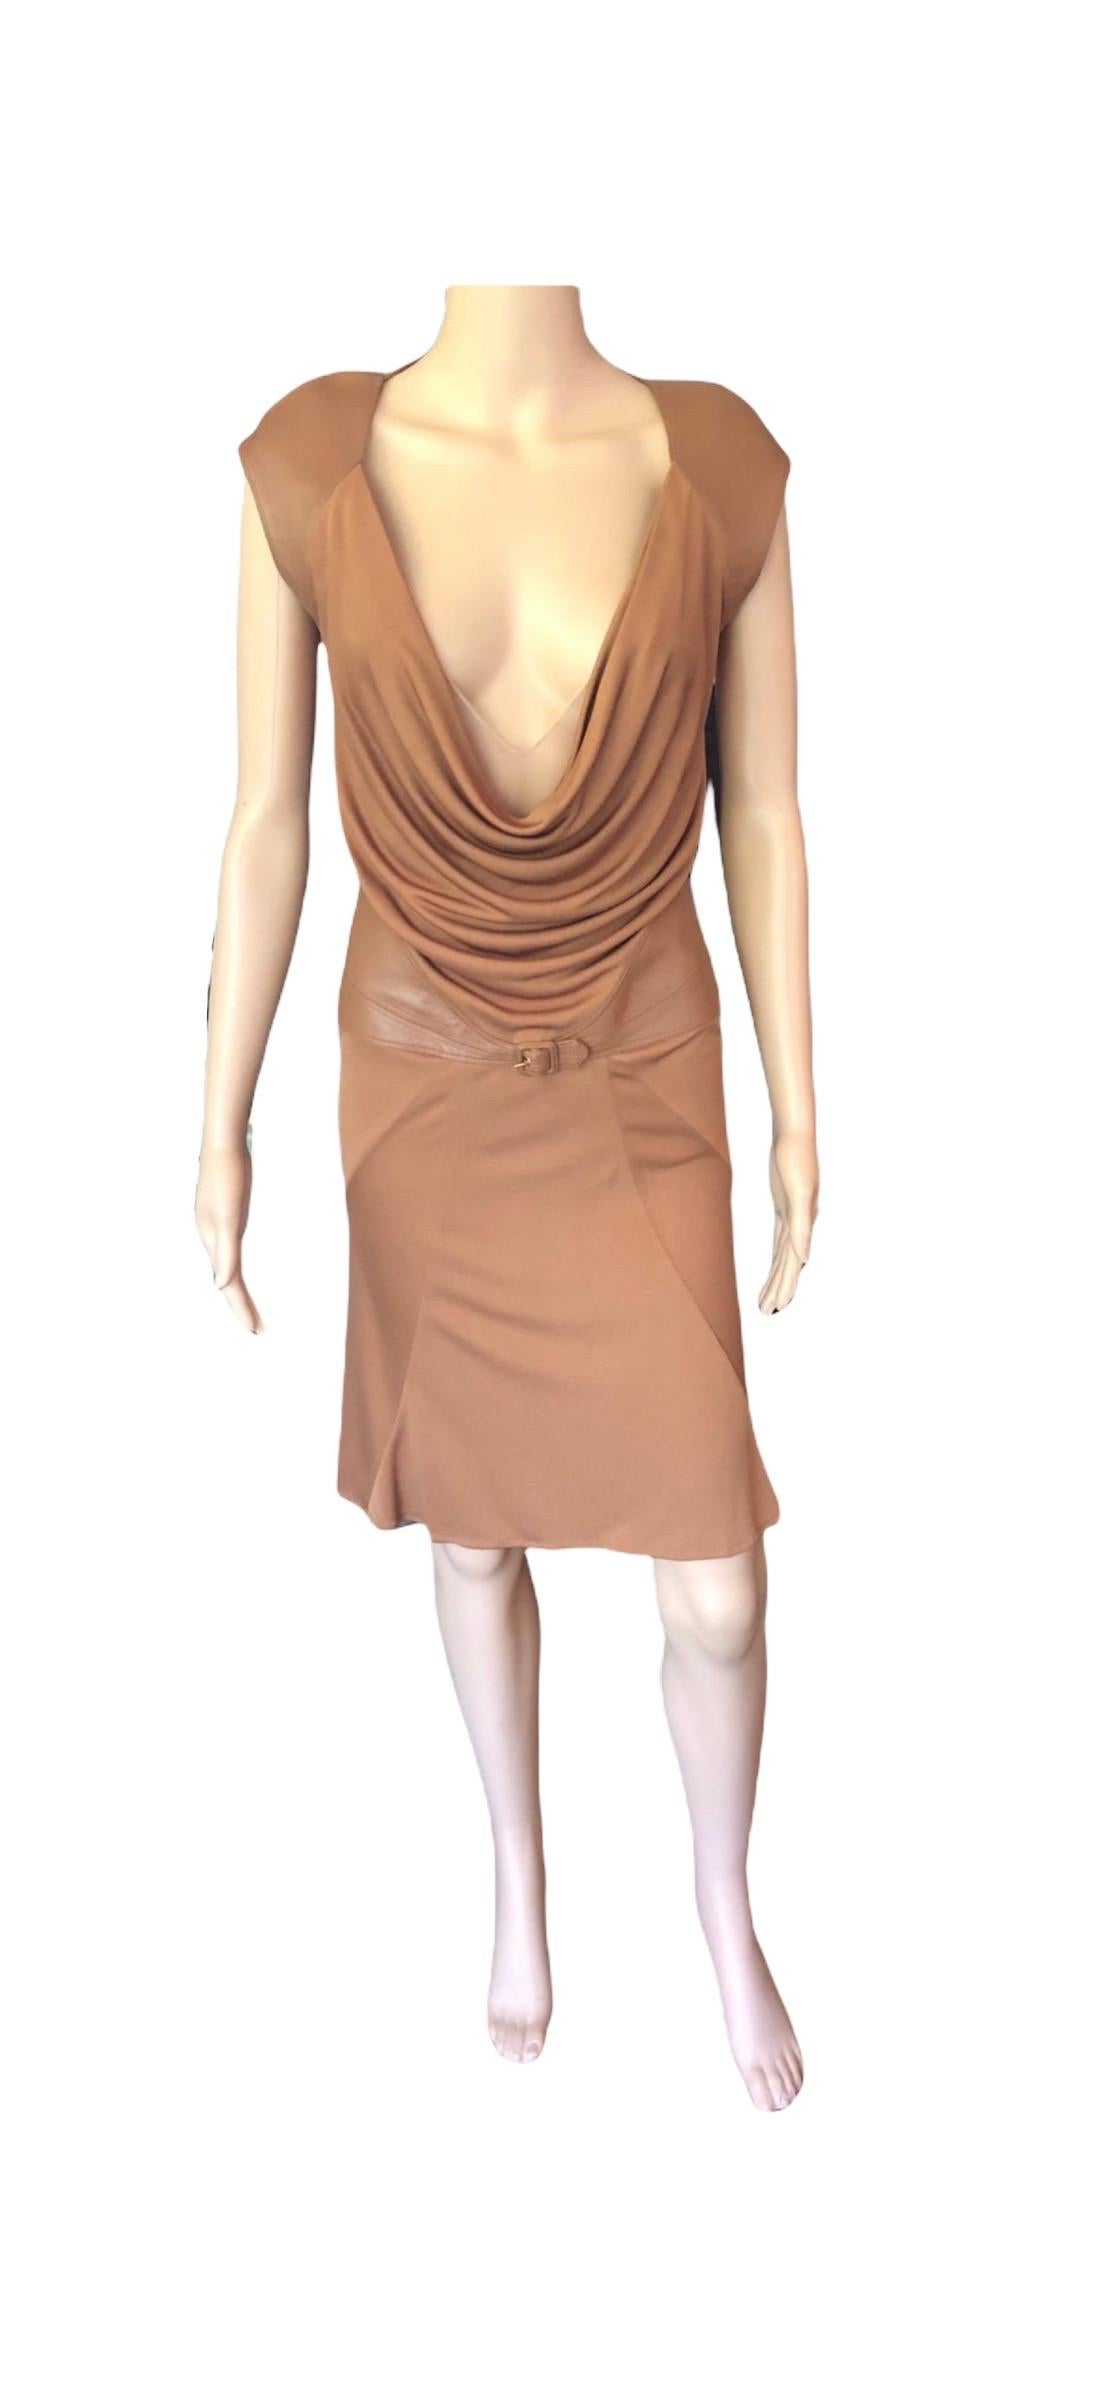 New Gianni Versace F/W 2001 Runway Vintage Leather Cutout Back Plunged Dress 7